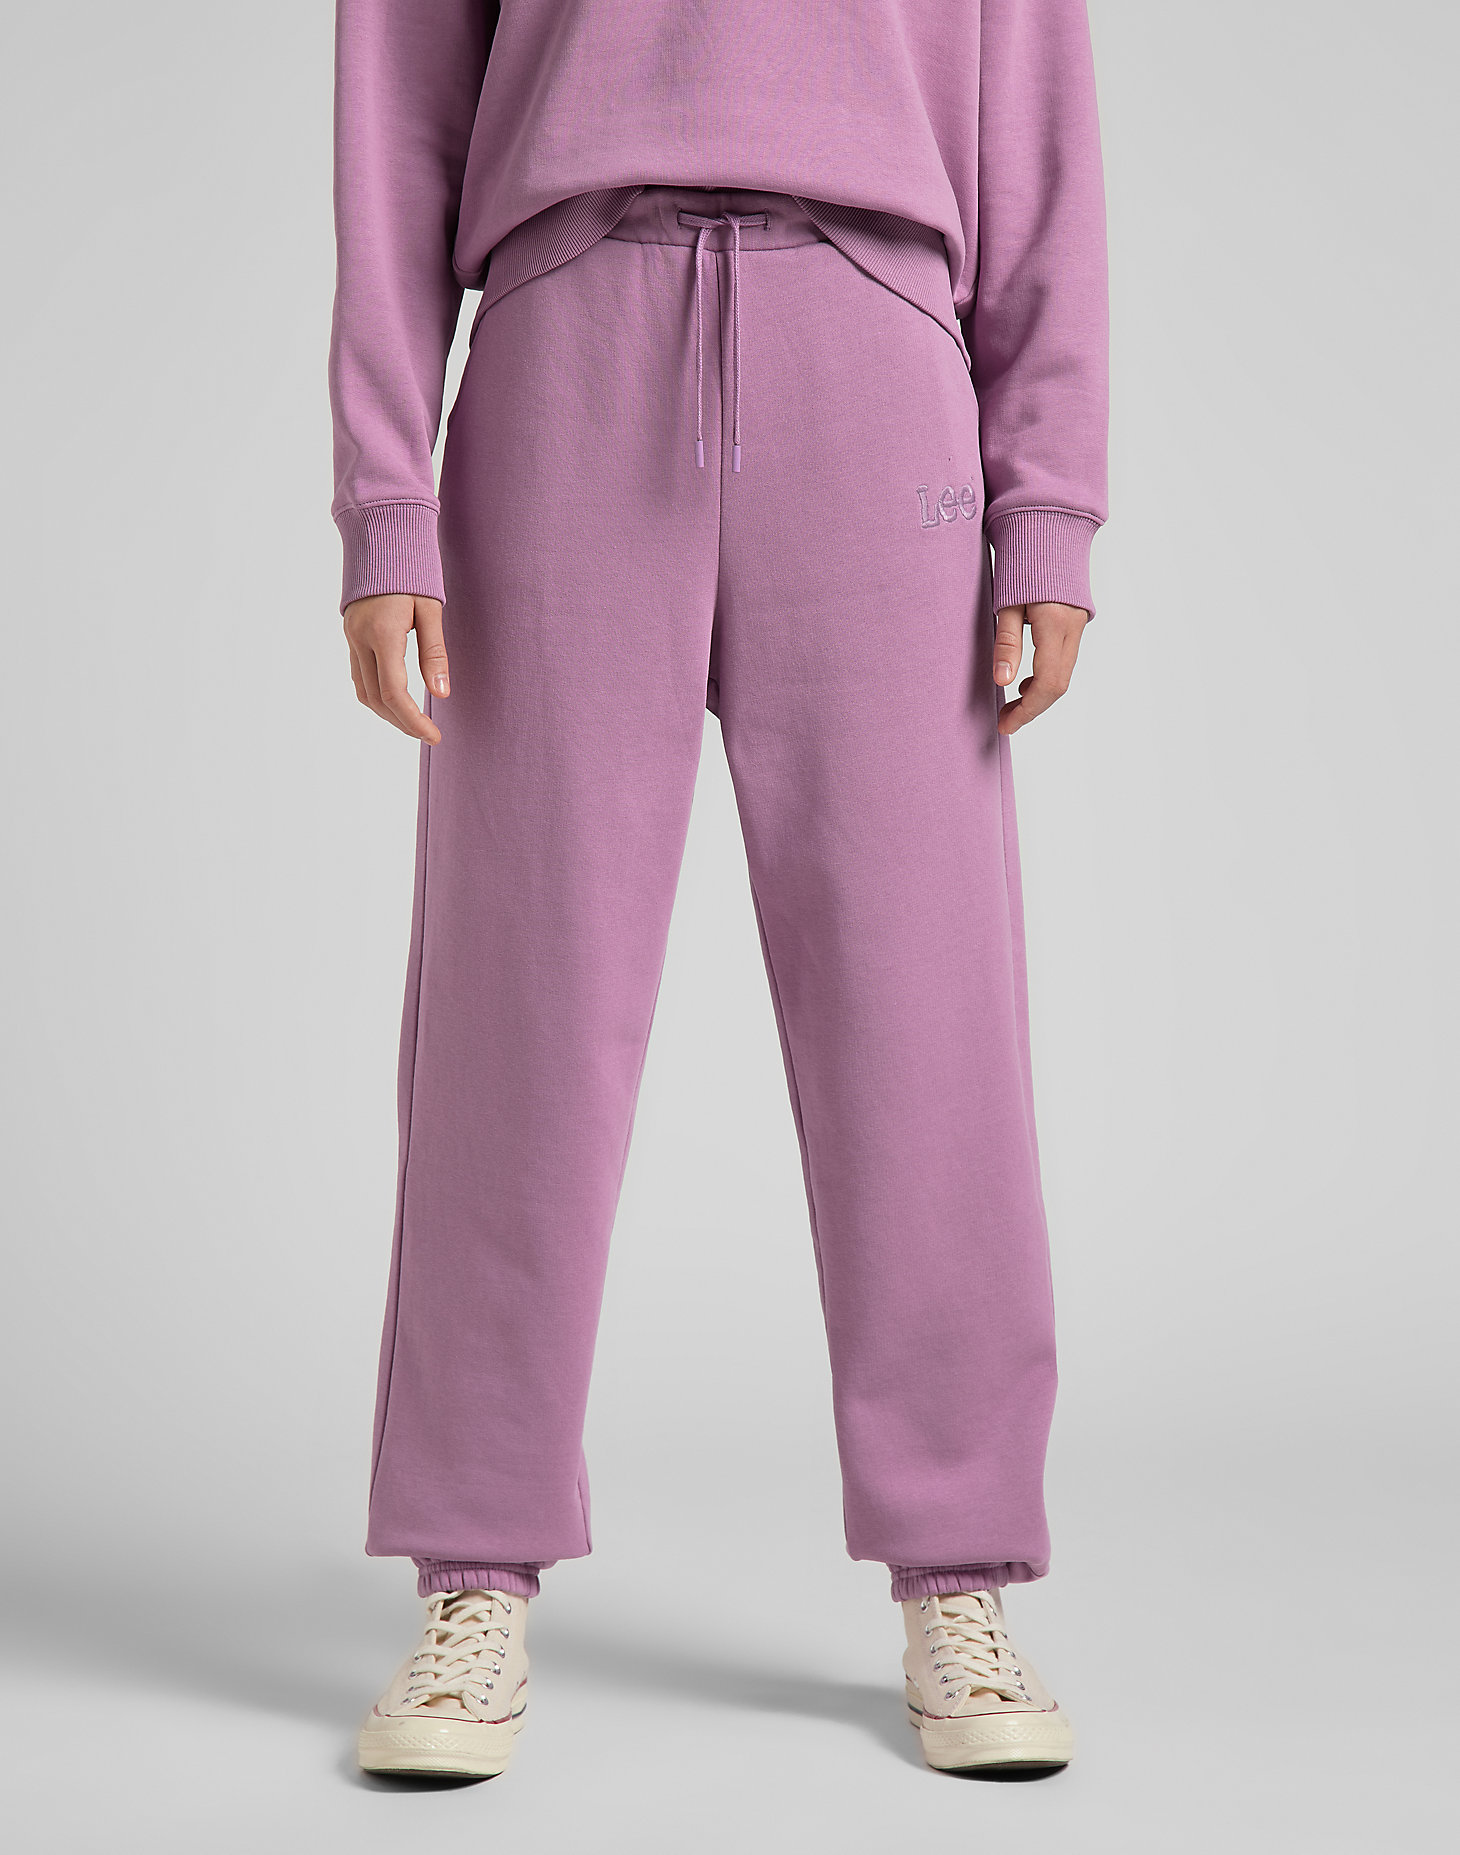 Relaxed Sweatpants in Plum alternative view 1